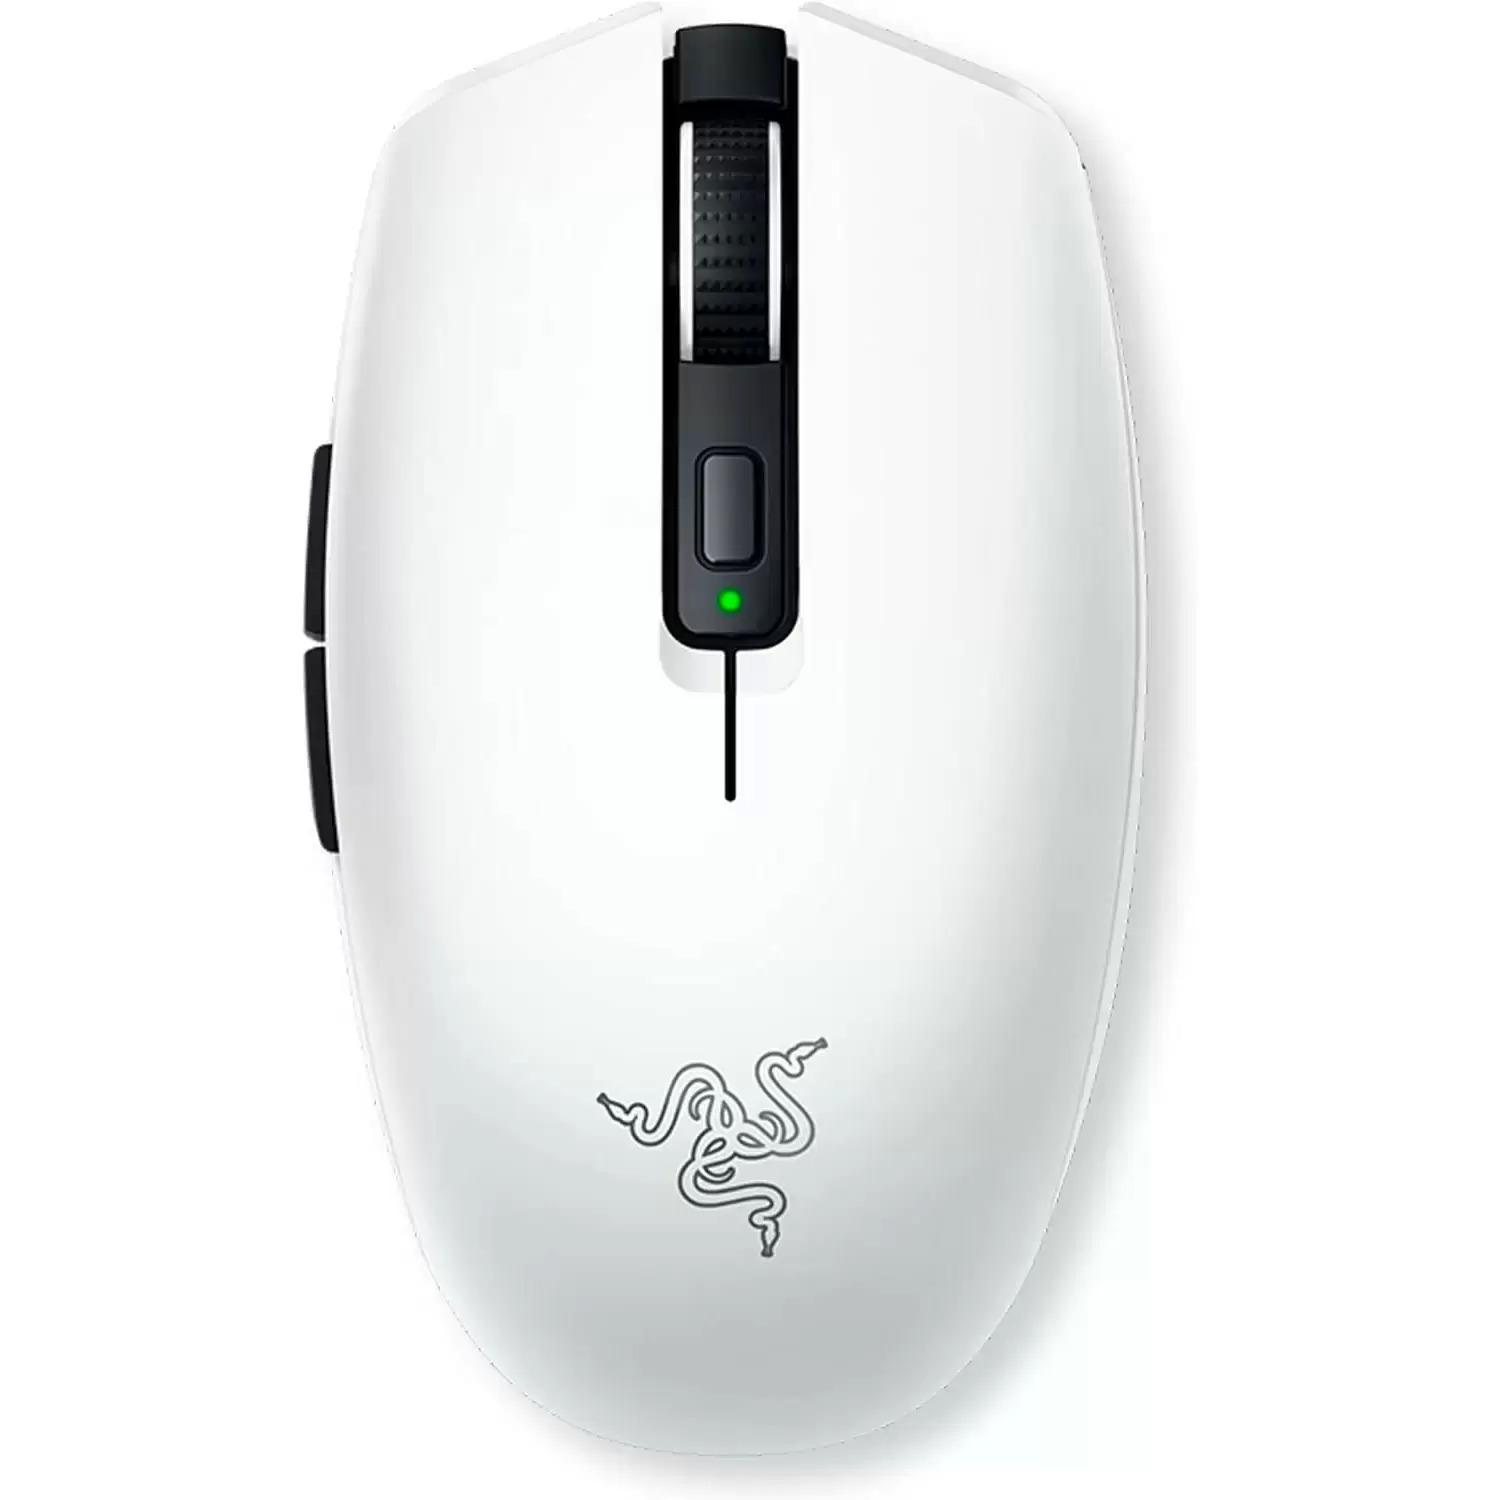 Razer Orochi V2 Wireless Optical Gaming Mouse for $28.75 Shipped